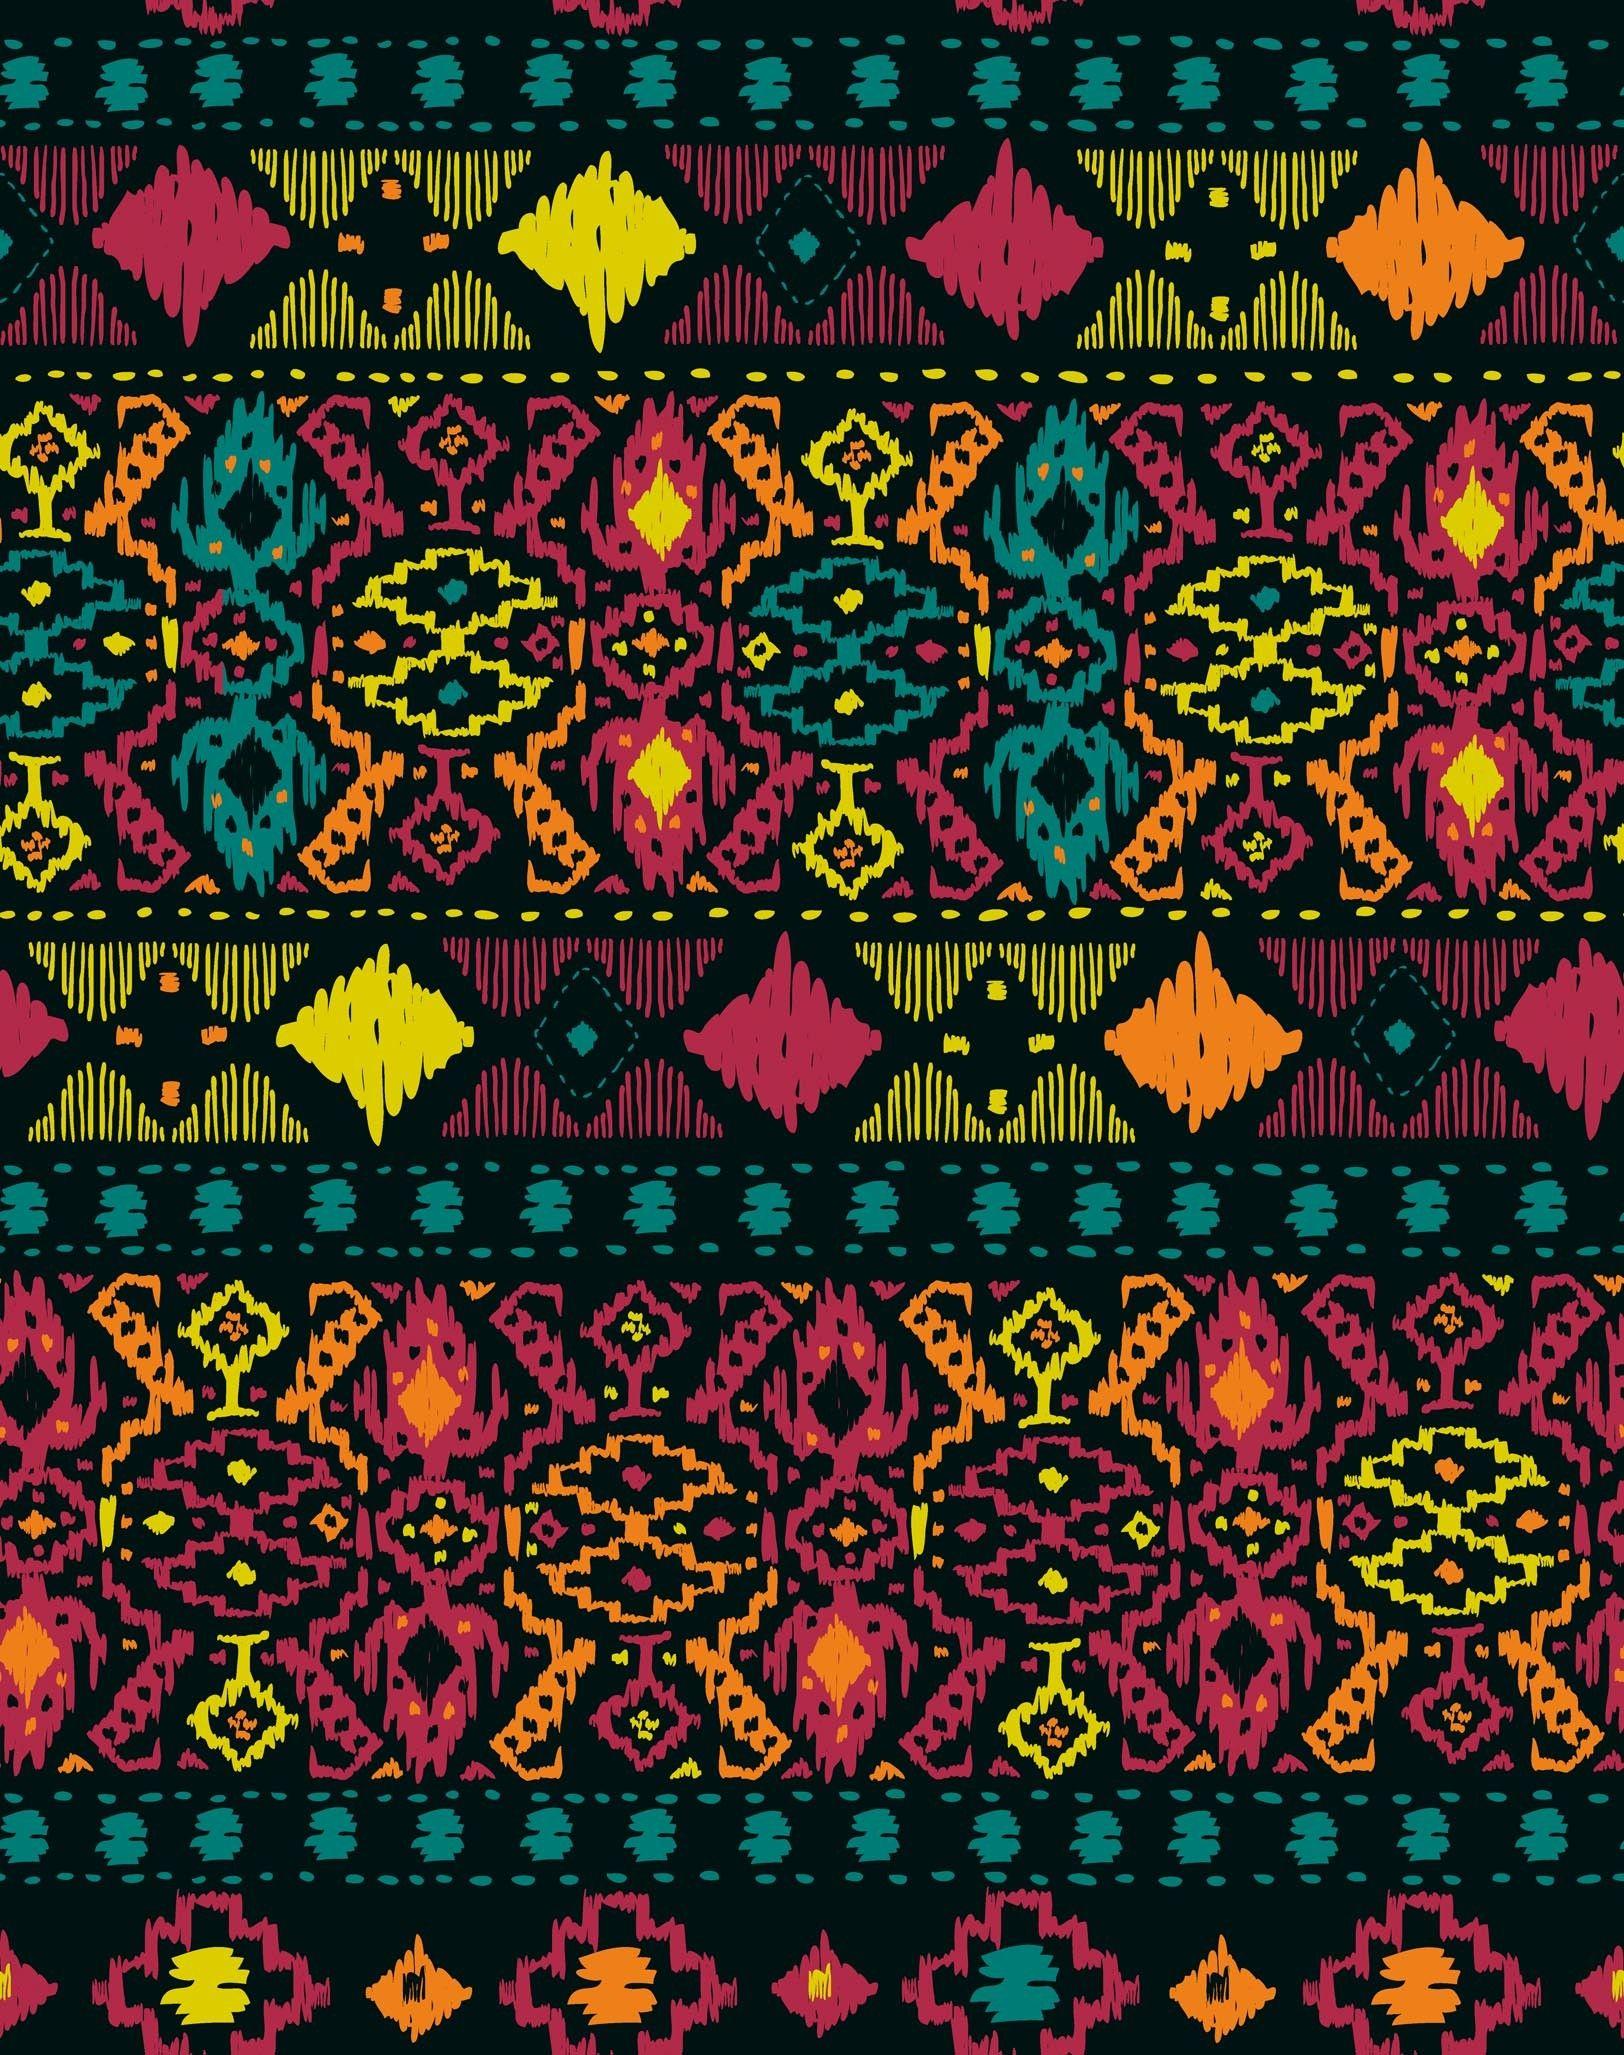 Hippie backgroundDownload free cool HD background